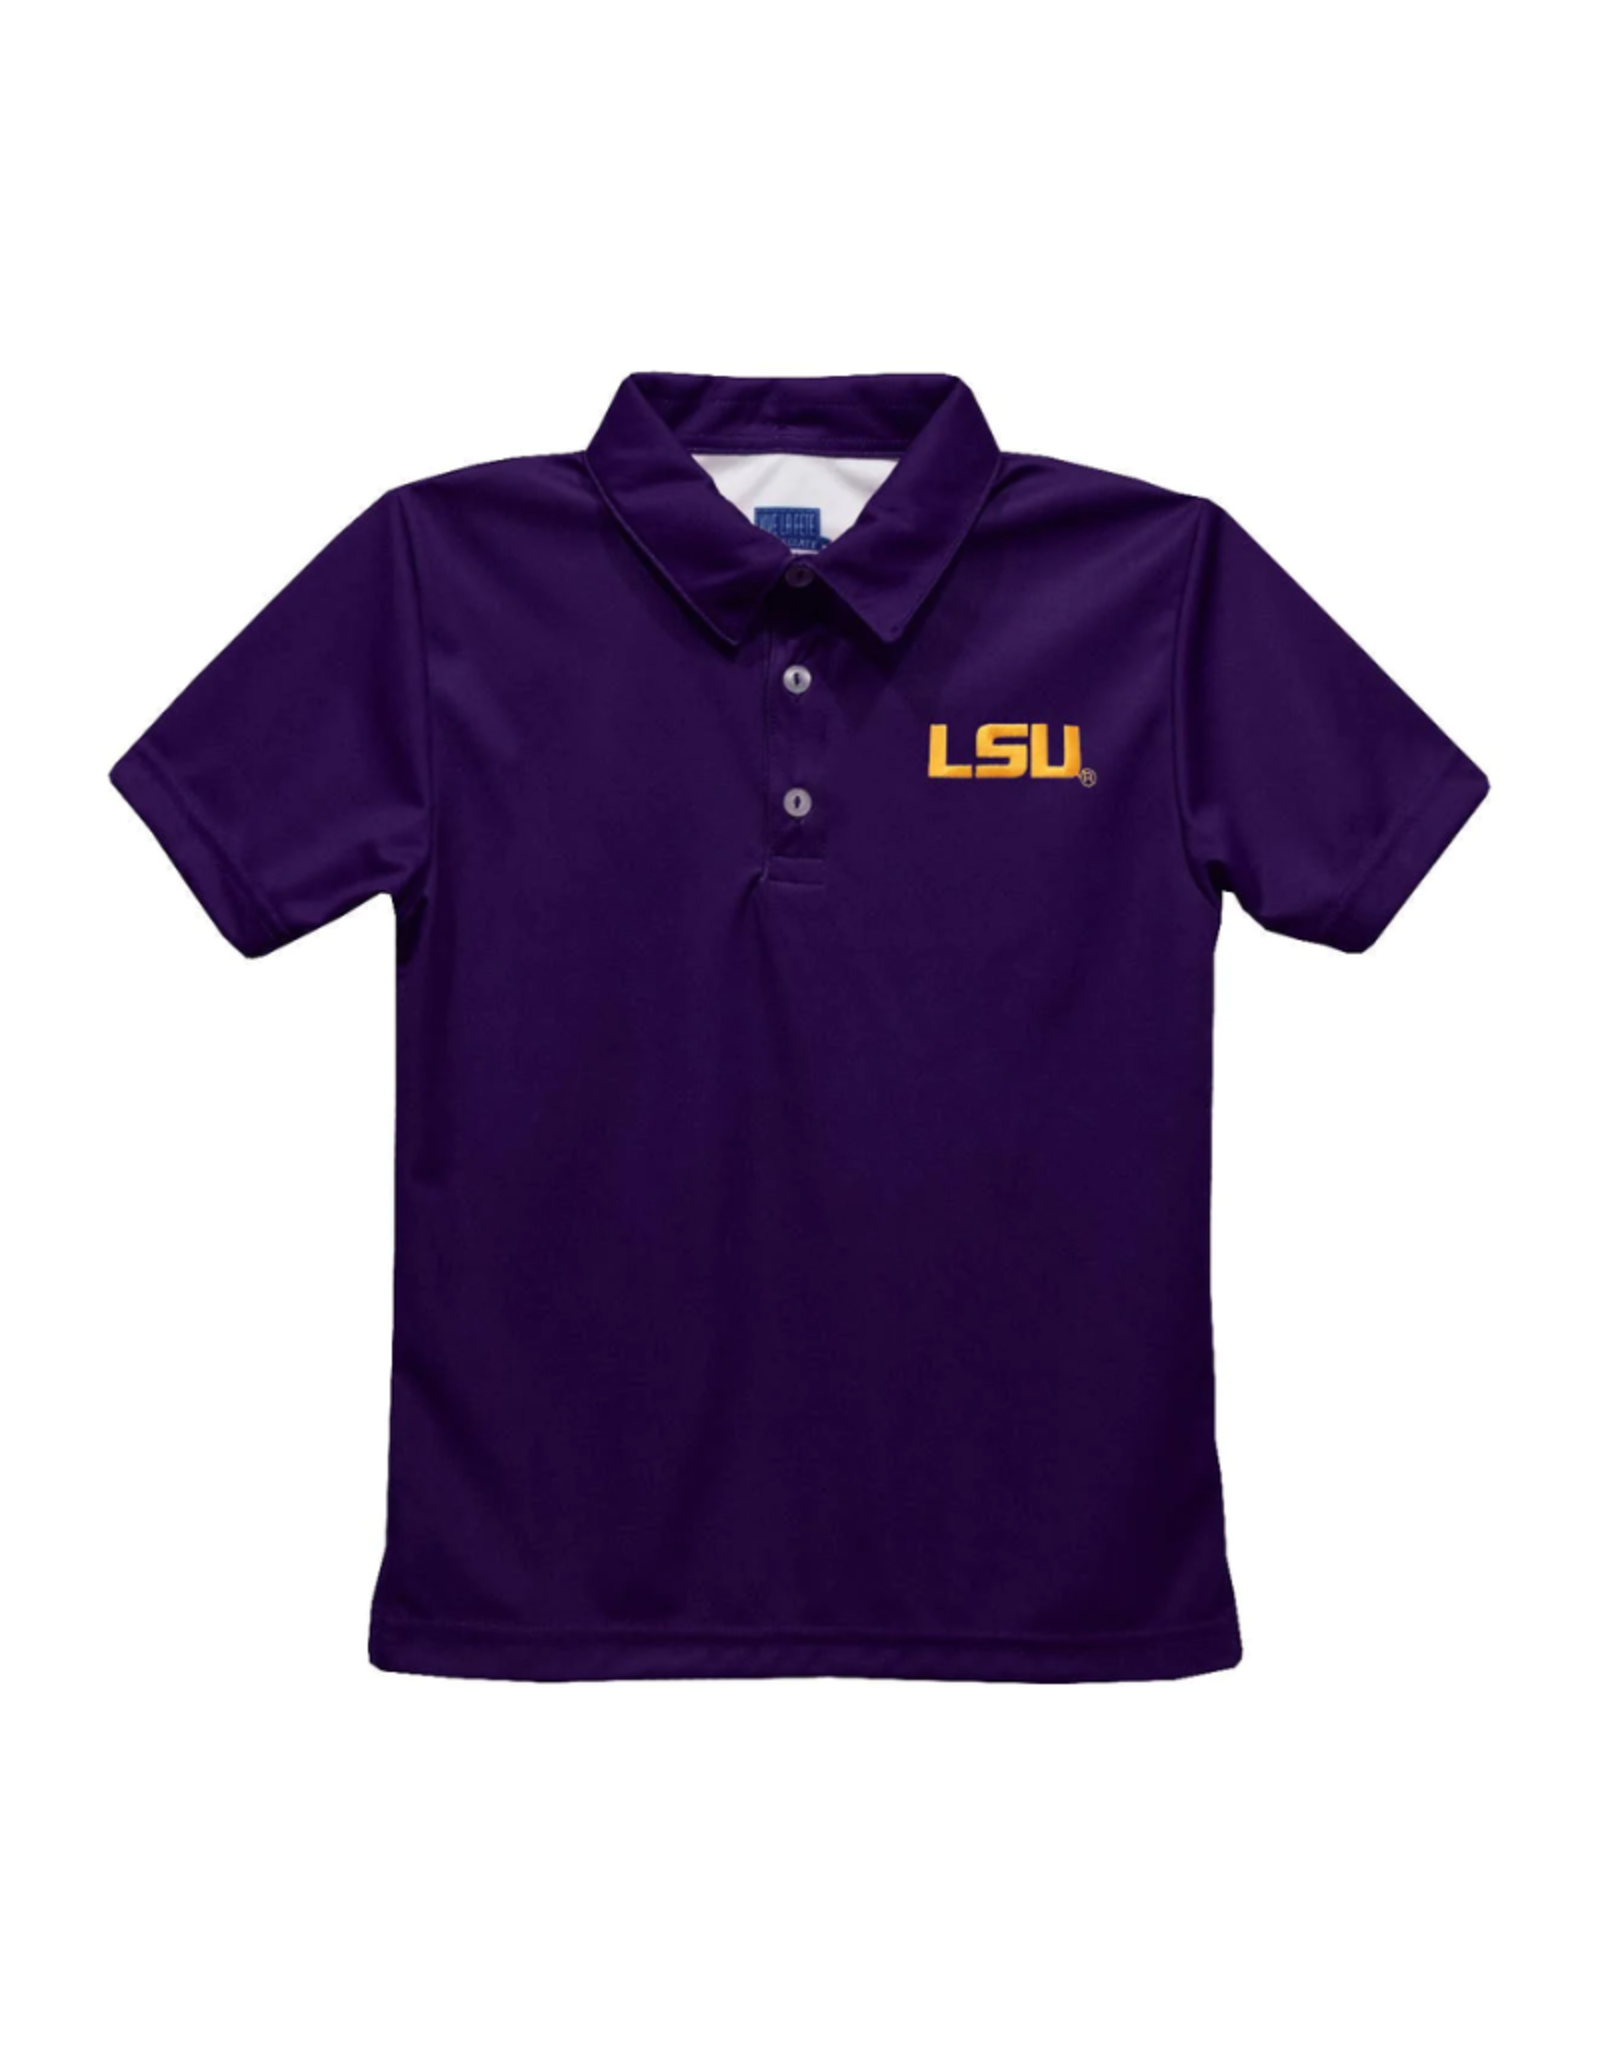 LSU Embroidered Purple Performance Polo